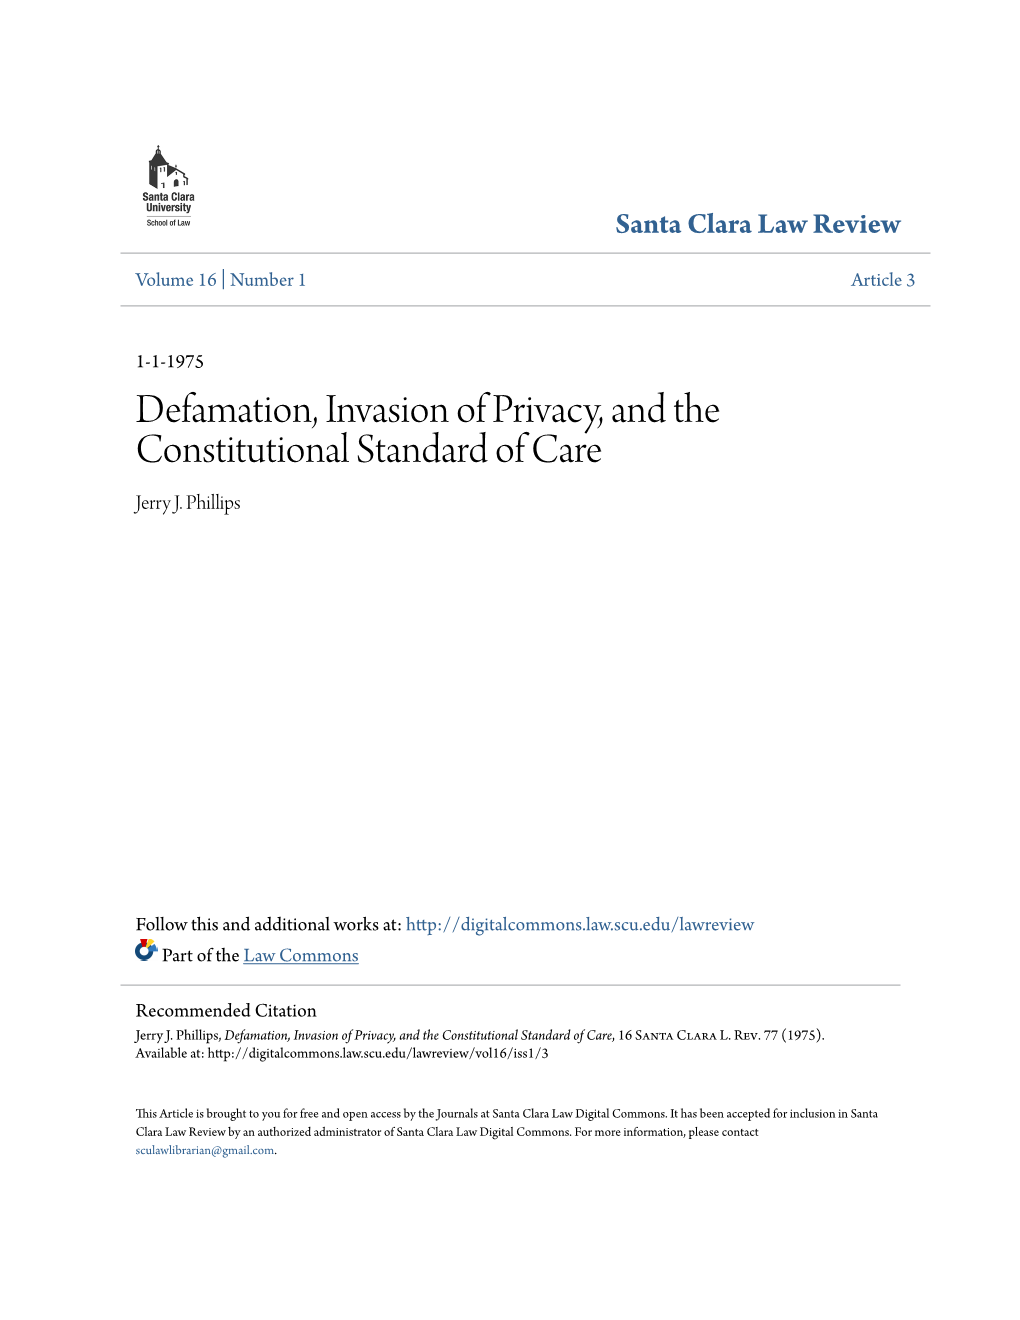 Defamation, Invasion of Privacy, and the Constitutional Standard of Care Jerry J